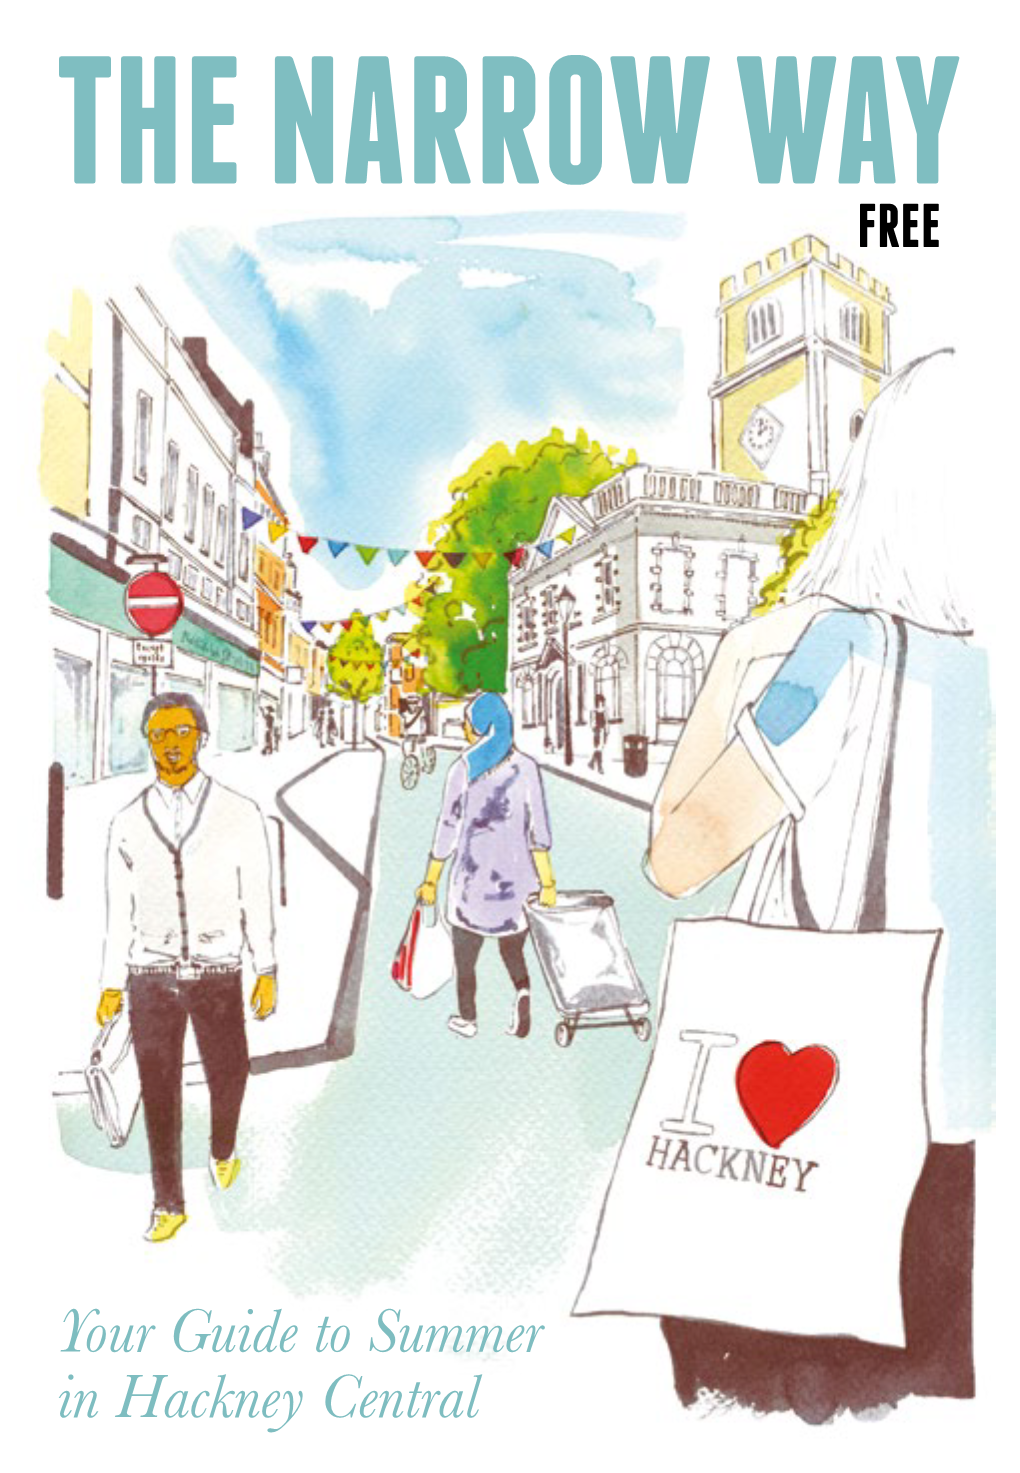 Your Guide to Summer in Hackney Central WELCOME